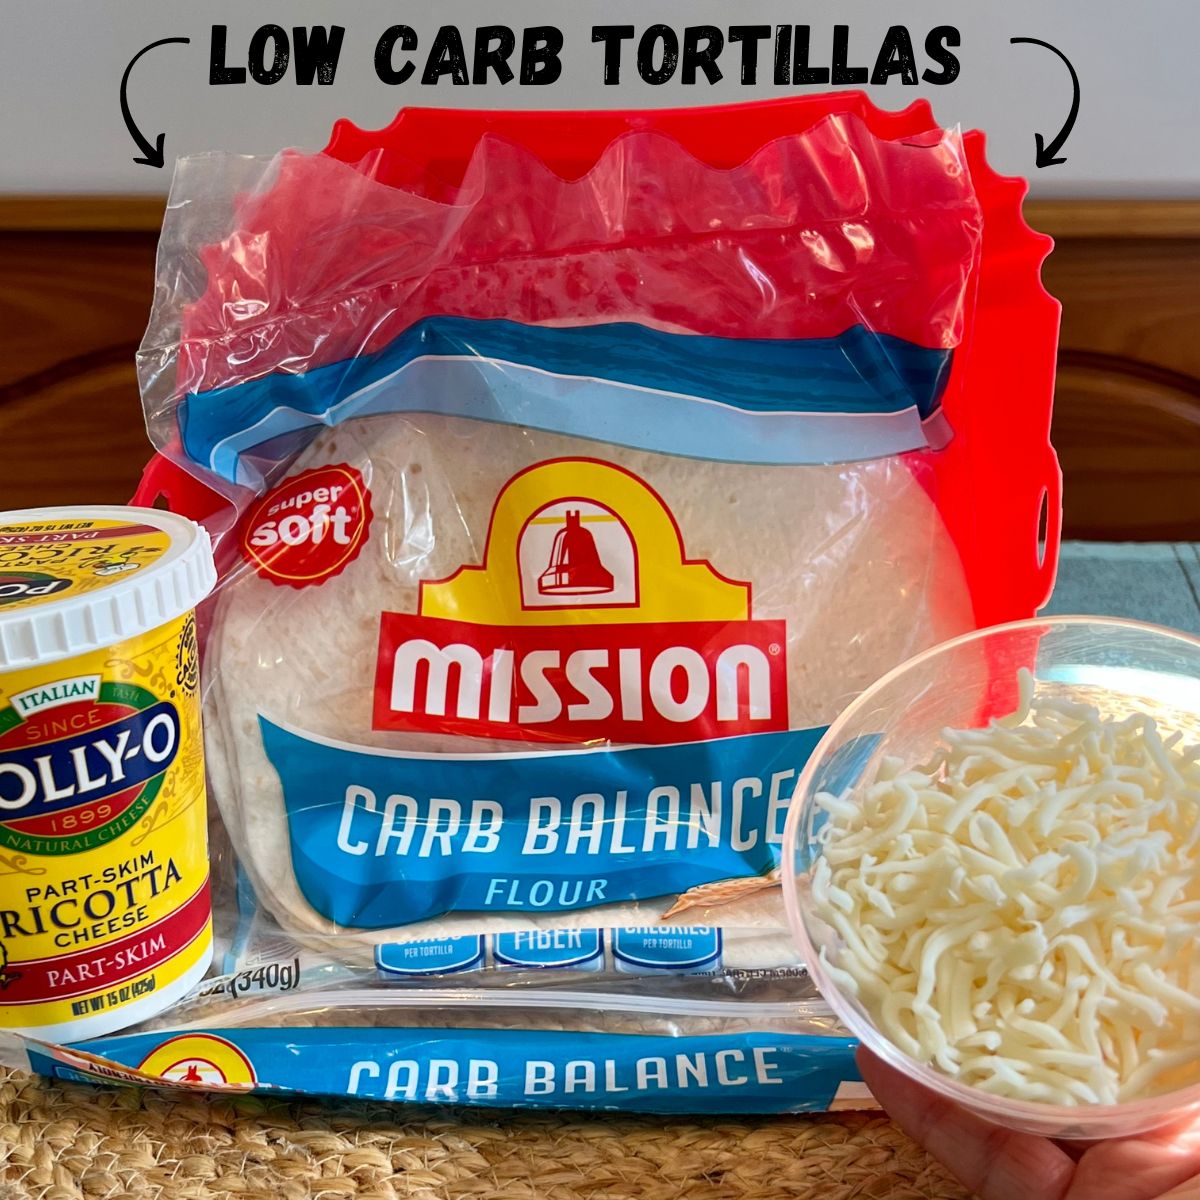 Low carb pizza ingredients a container of low fat ricotta cheese low carb flour tortillas and fat free mozzarella cheese